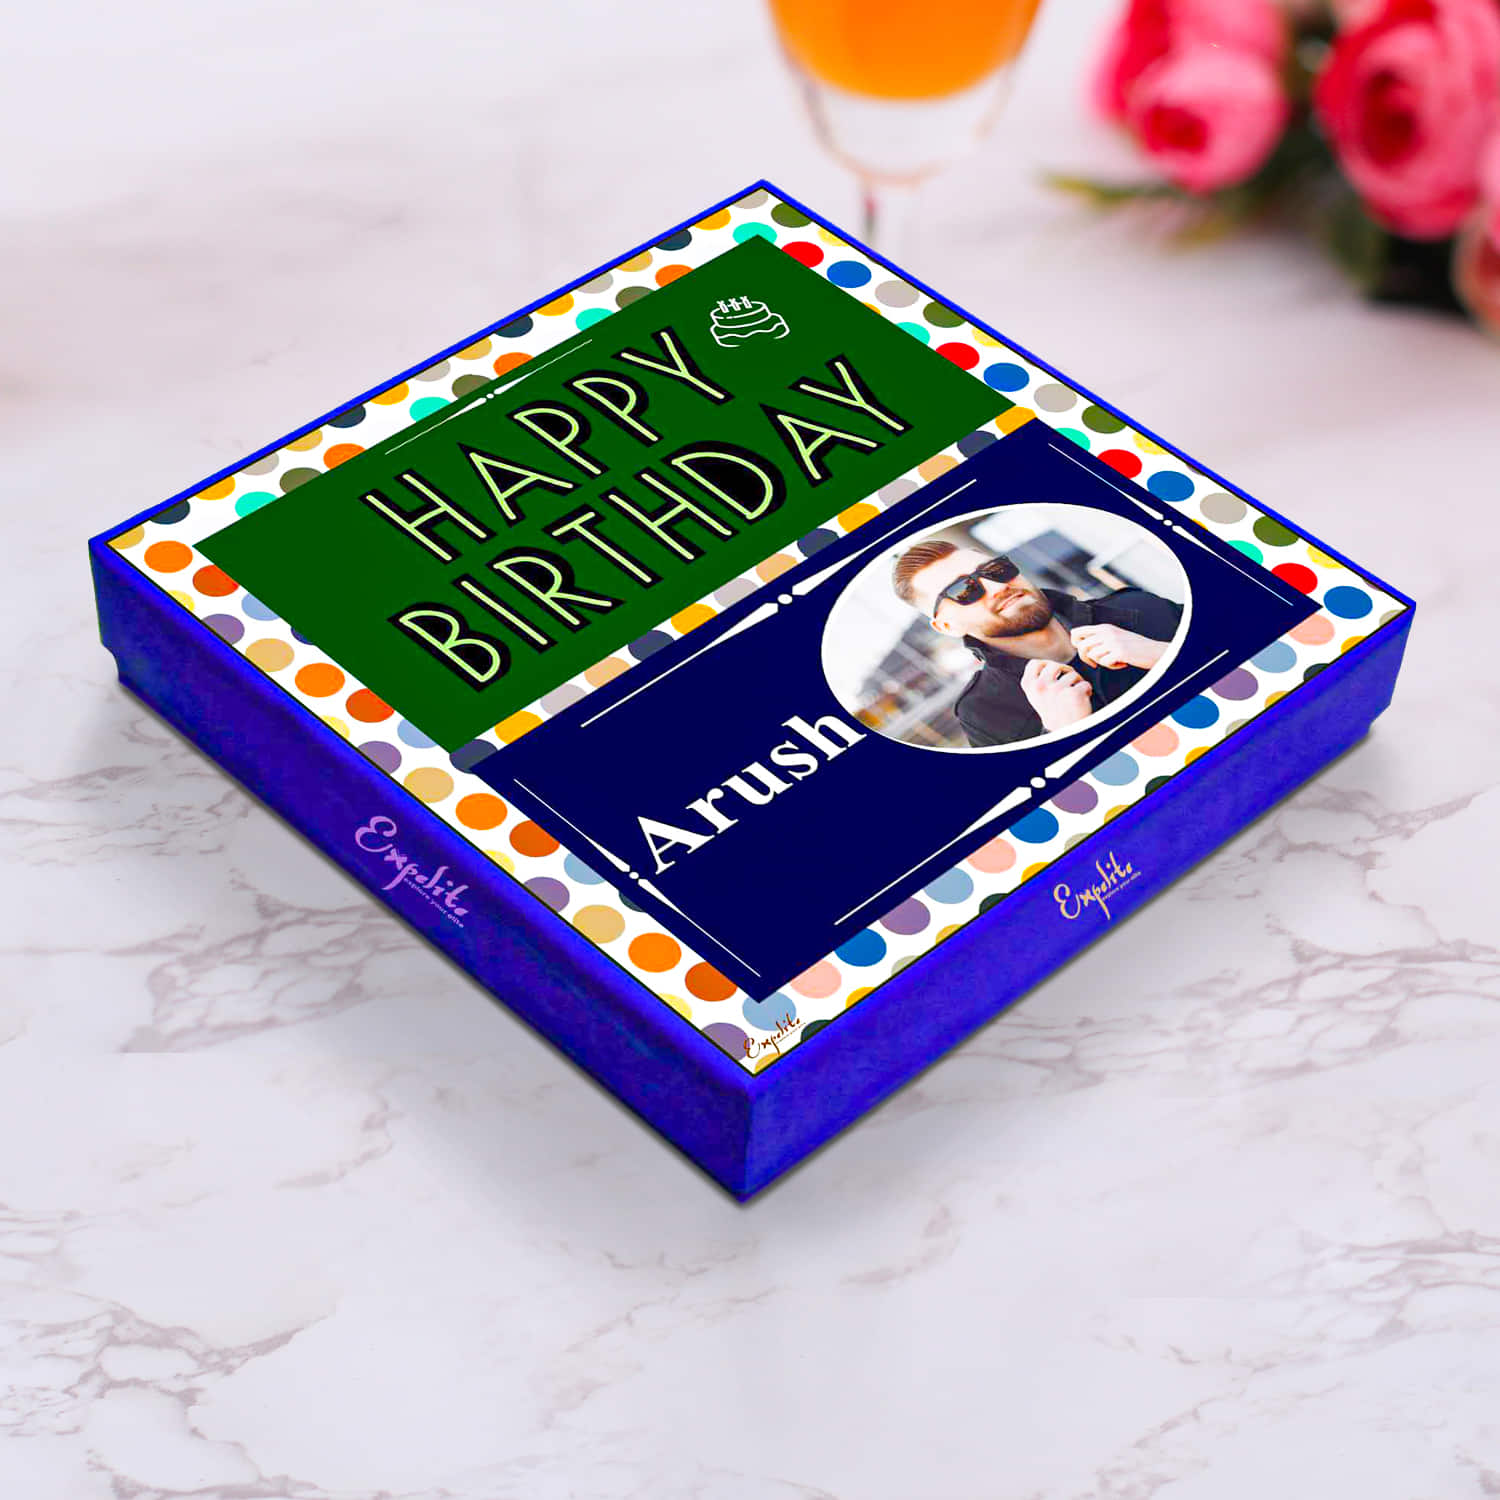 Customized Gifts In Hyderabad, Telangana At Best Price | Customized Gifts  Manufacturers, Suppliers In Secunderabad